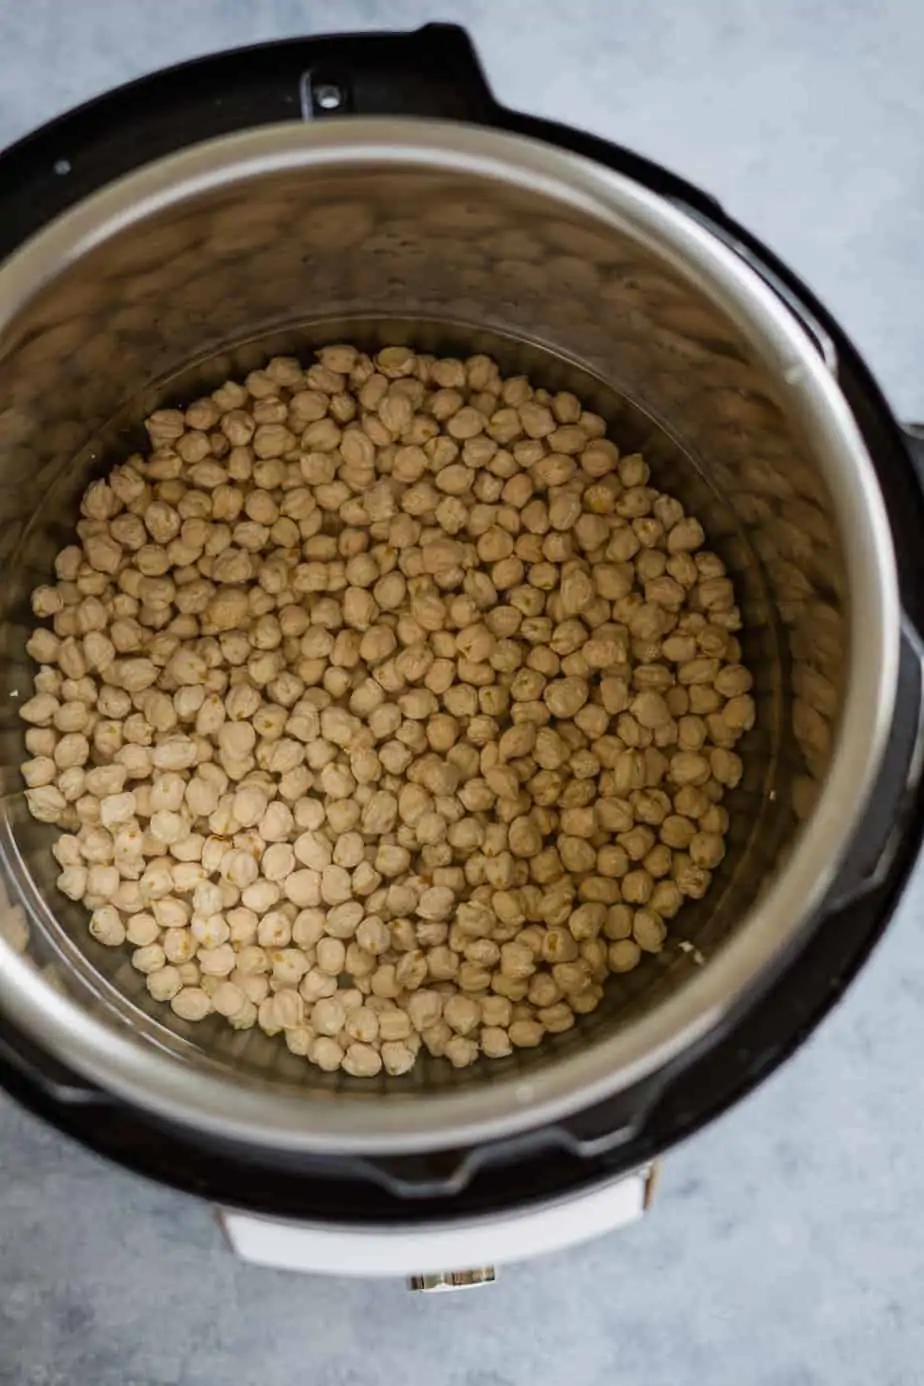 dried chickpeas with water inside the instant pot to pressure cook and make homemade hummus.